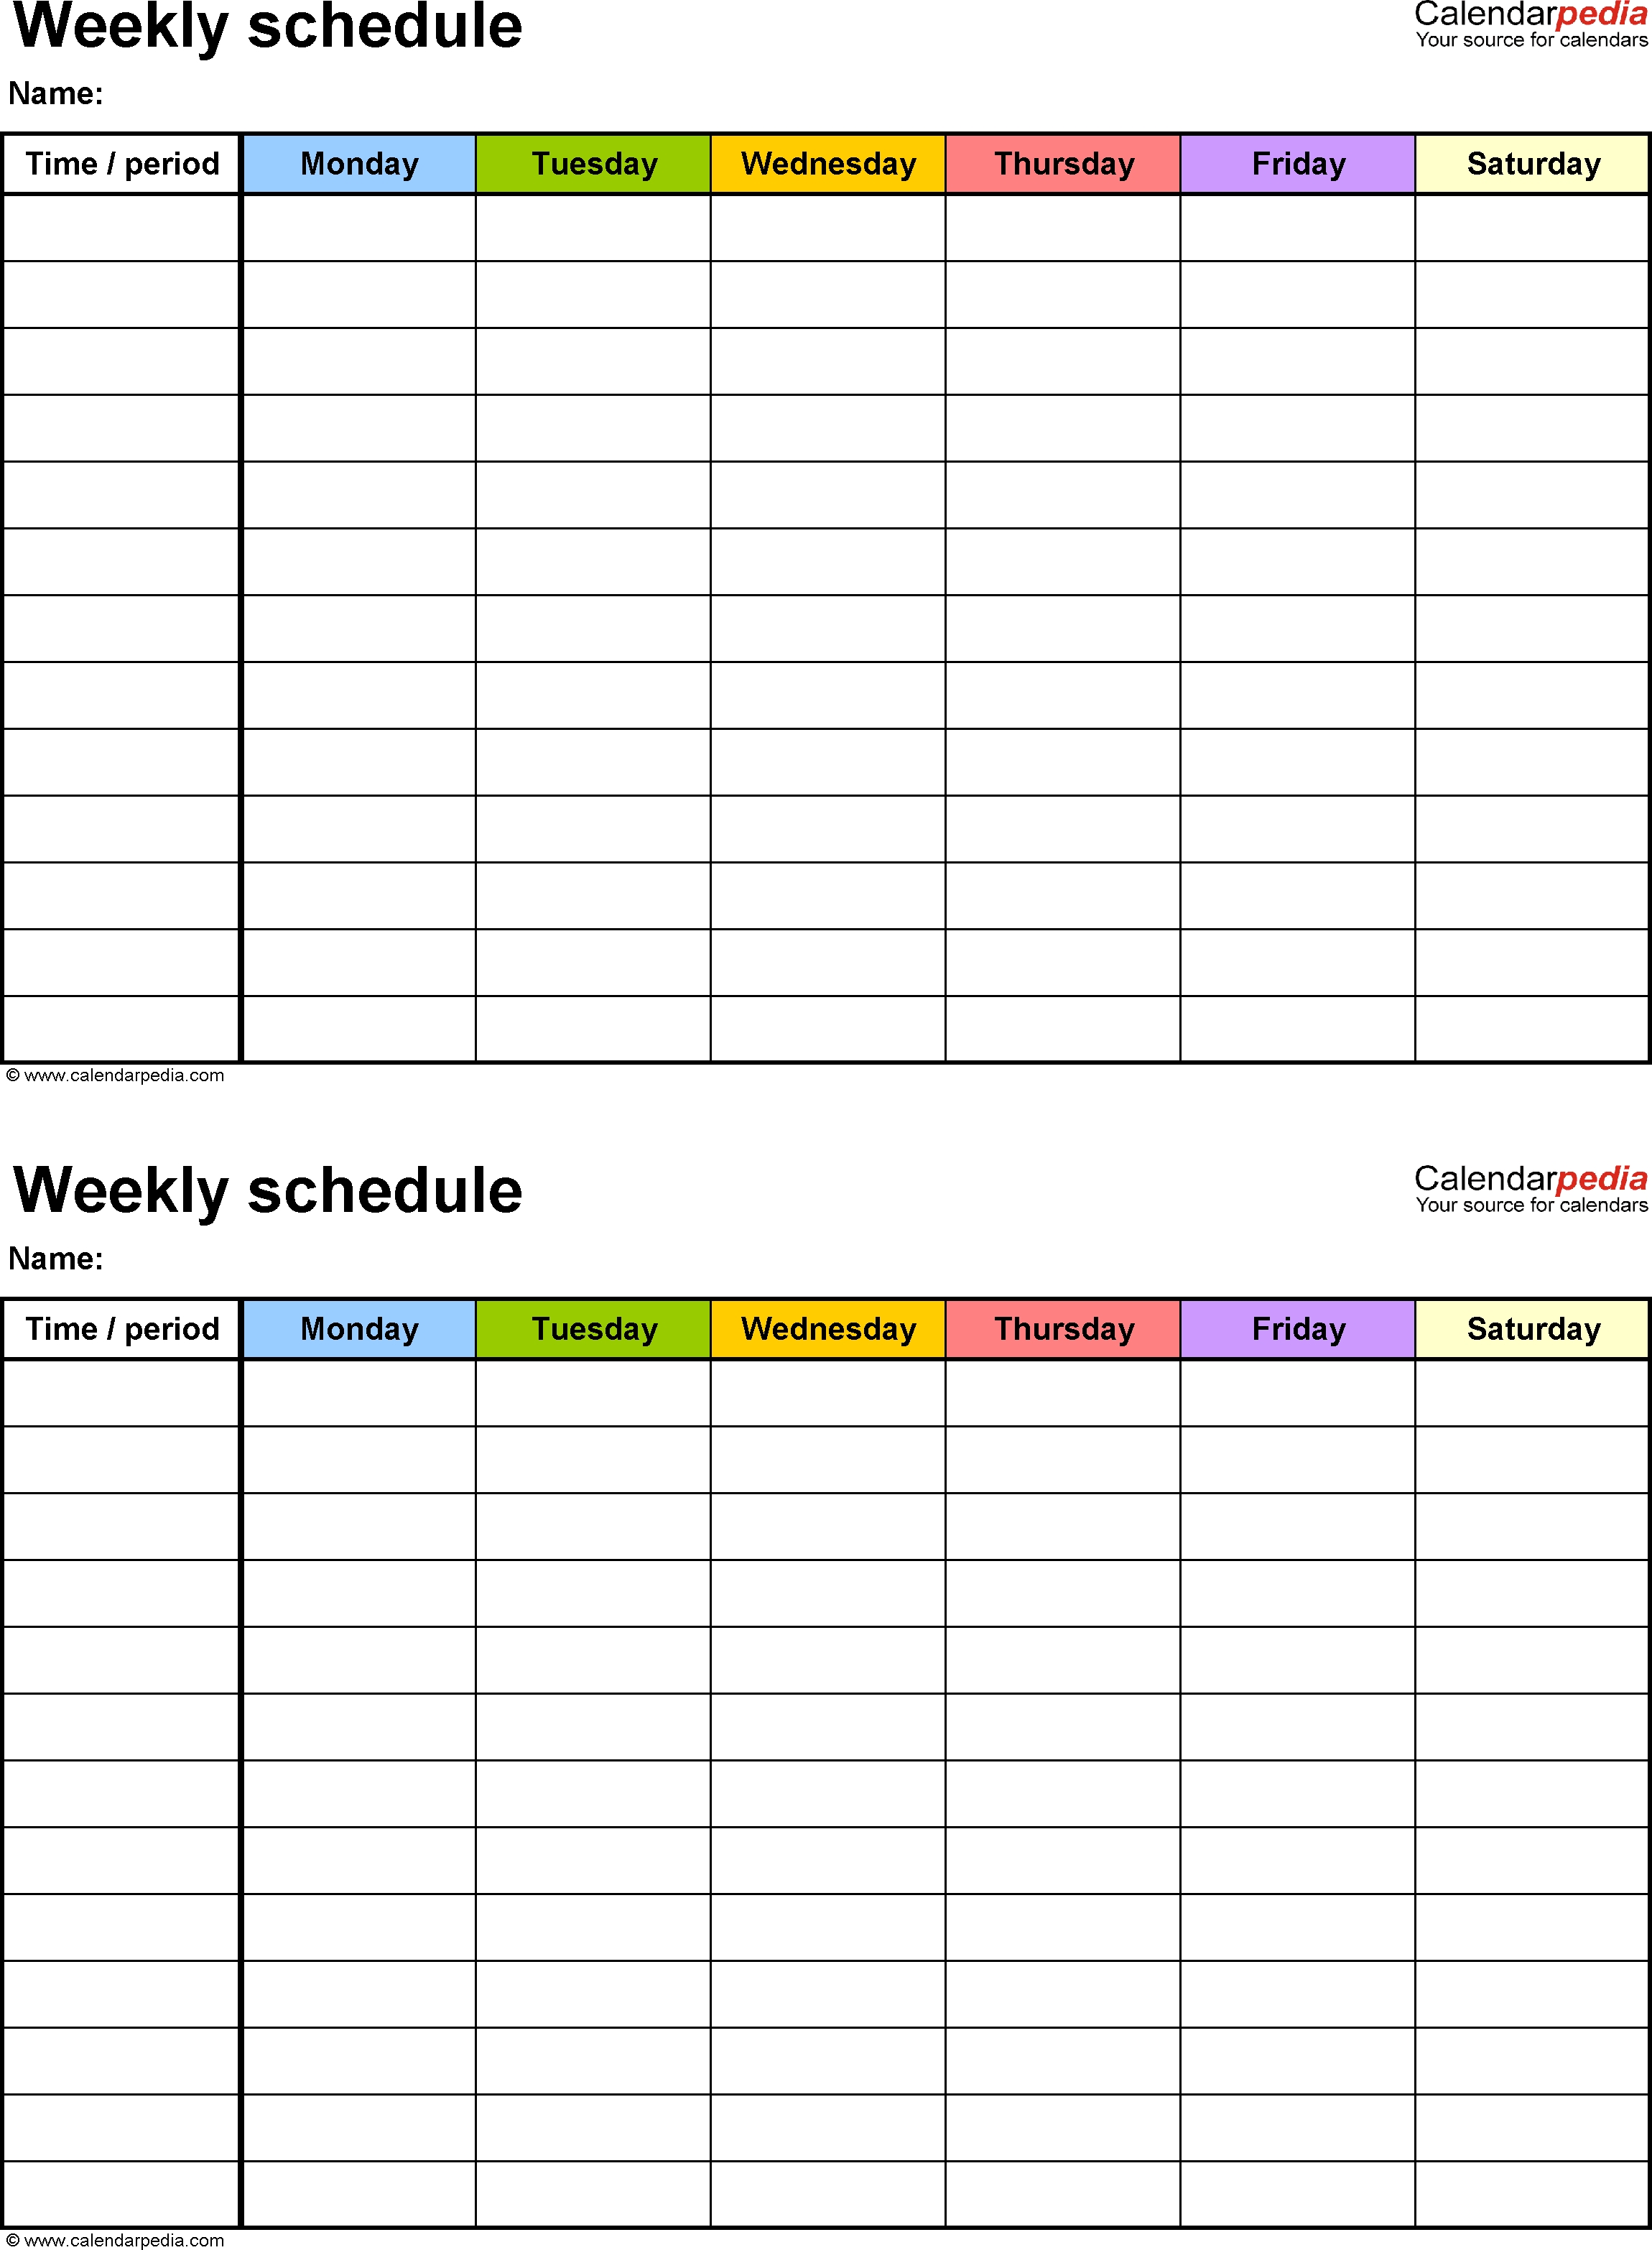 Free Weekly Schedule Templates For Word - 18 Templates pertaining to Blank 7 Day Calendar To Print